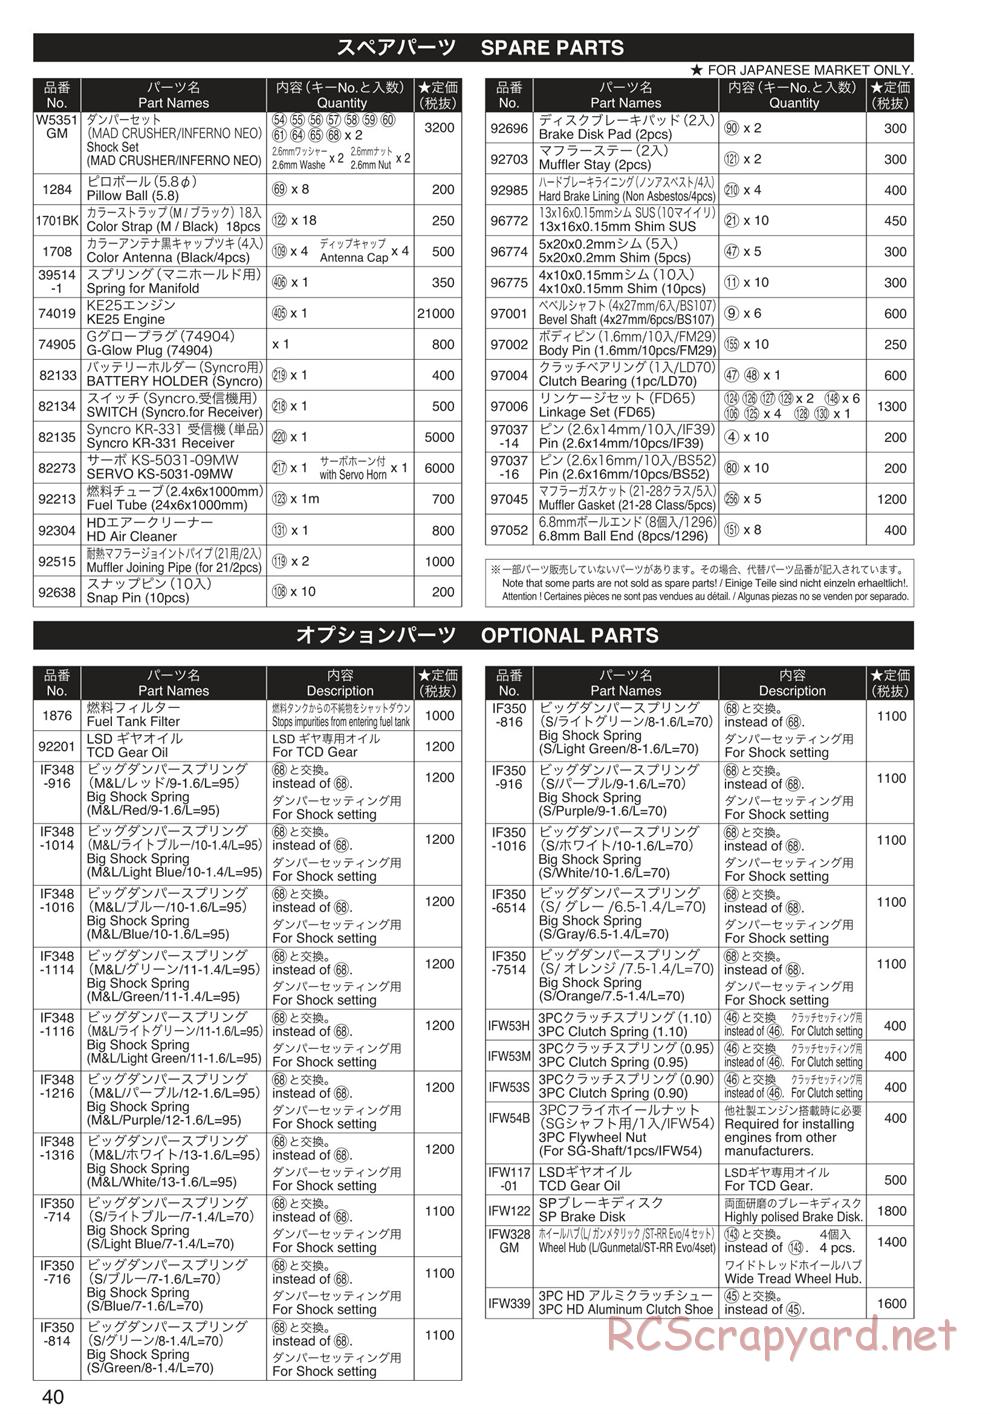 Kyosho - Mad Crusher - Parts List - Page 2